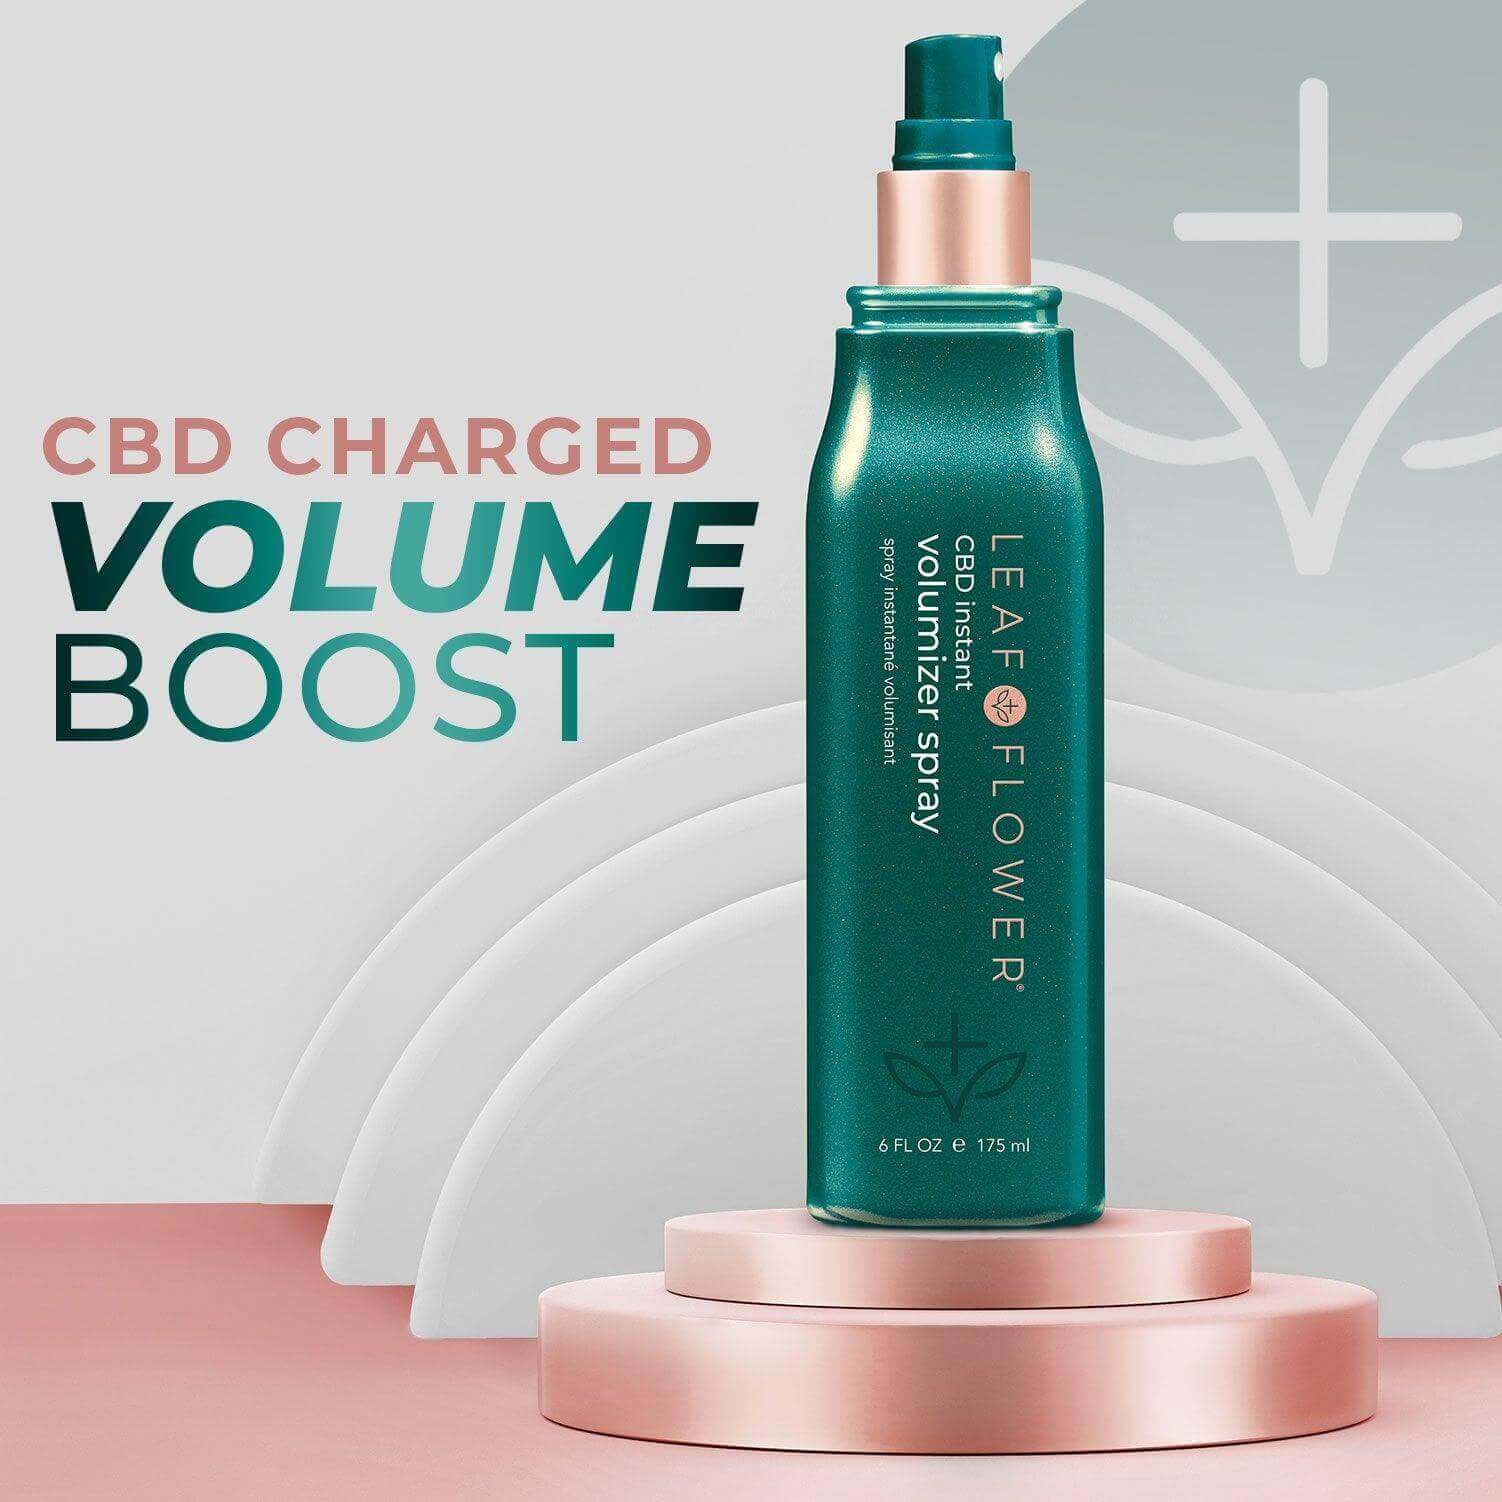 Leaf and Flower CBD charged volumize.